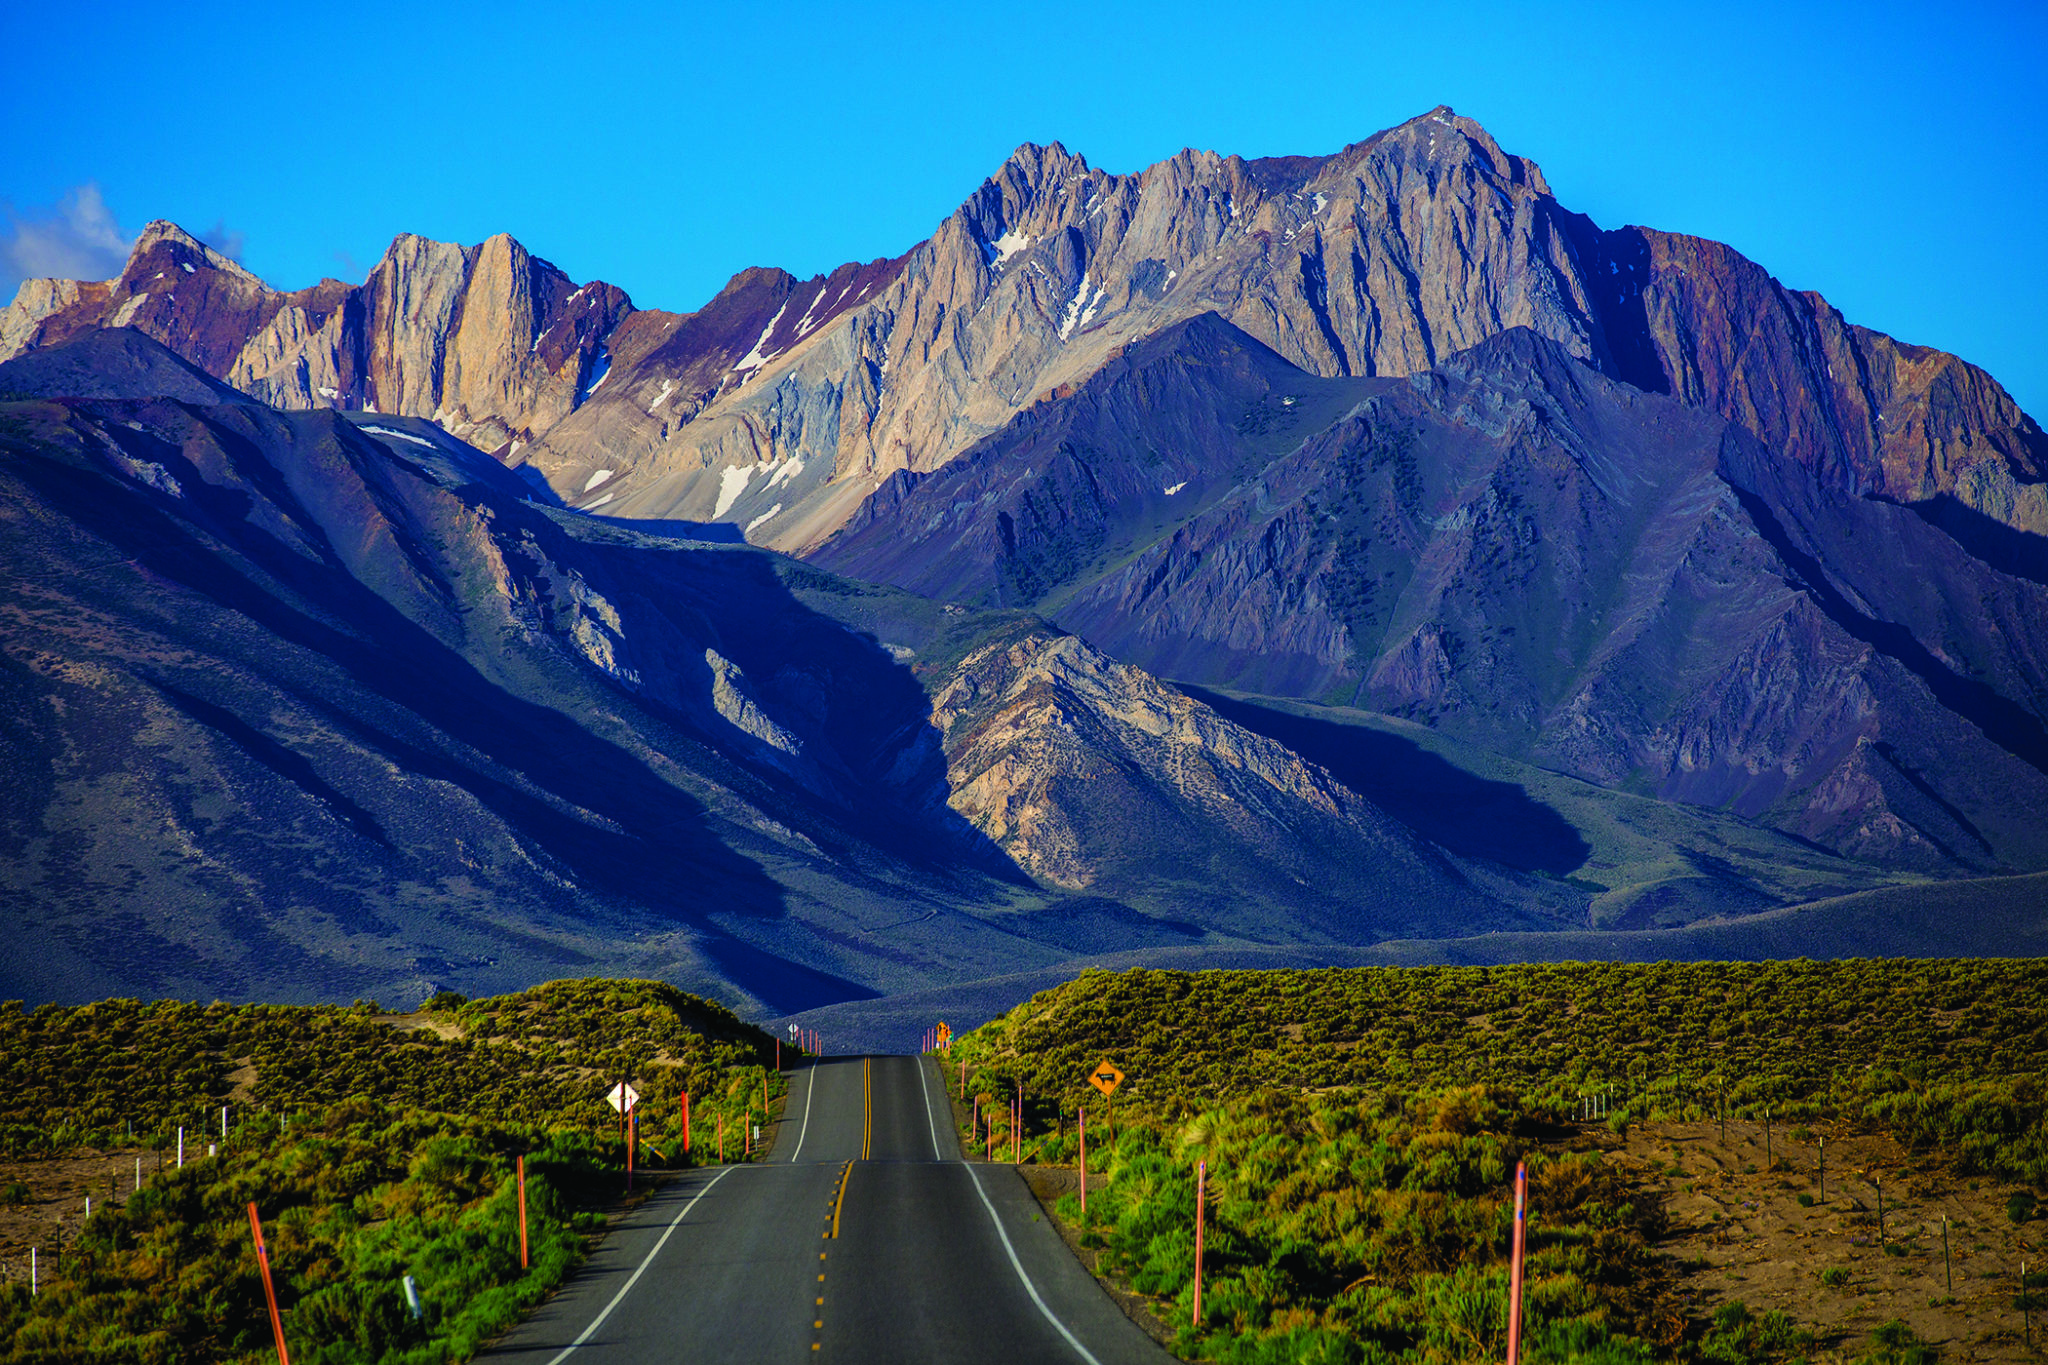 Roadway down Highway 395 with mountains as the backdrop